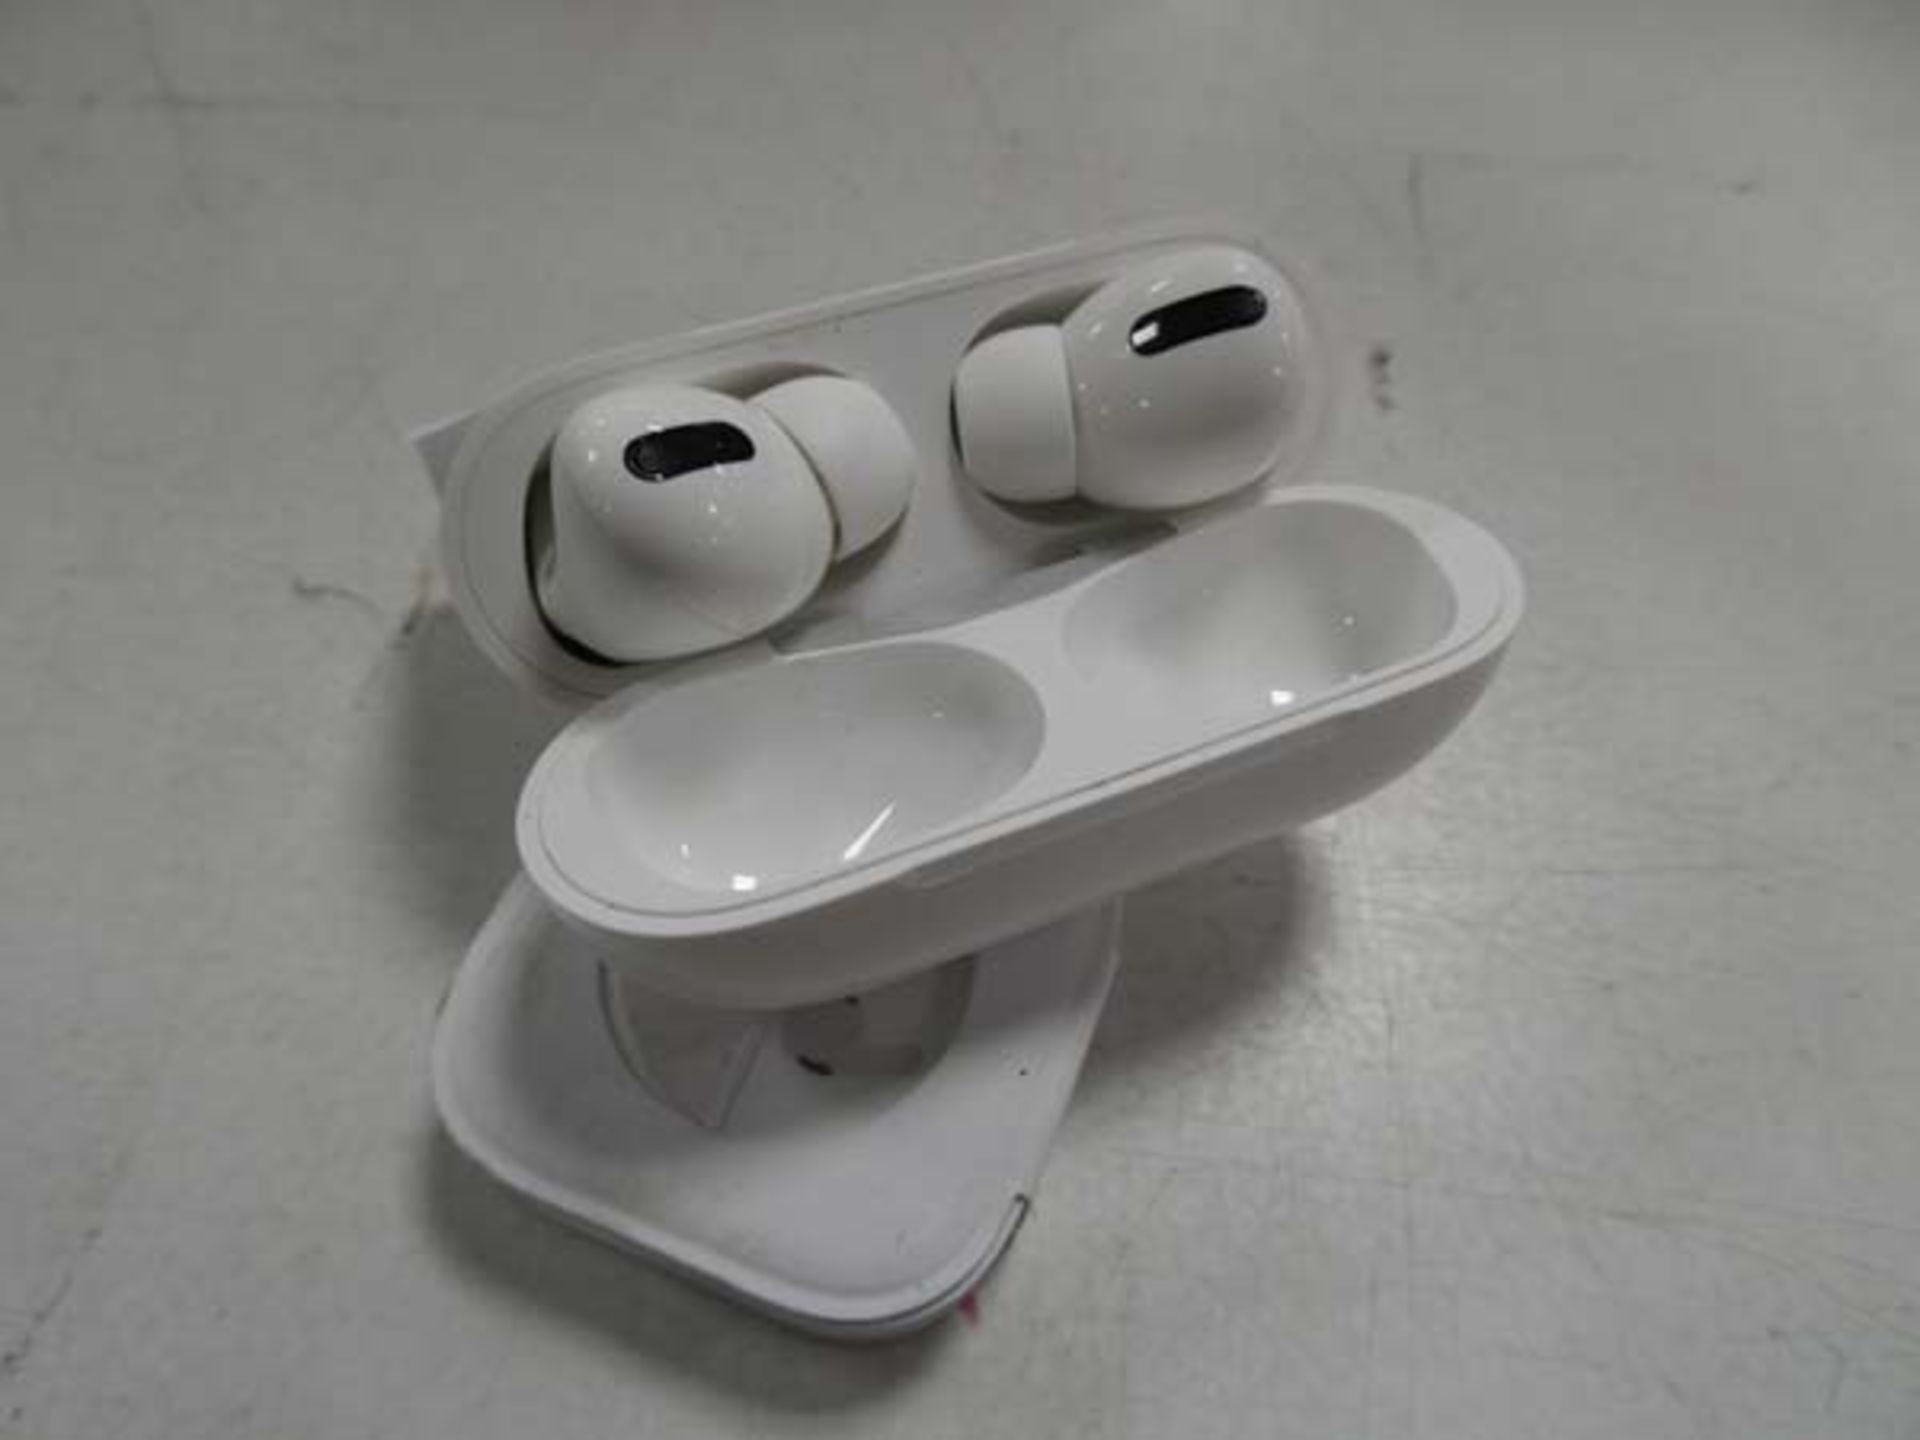 Apple AirPods Pro with spare eartips and wireless charging case